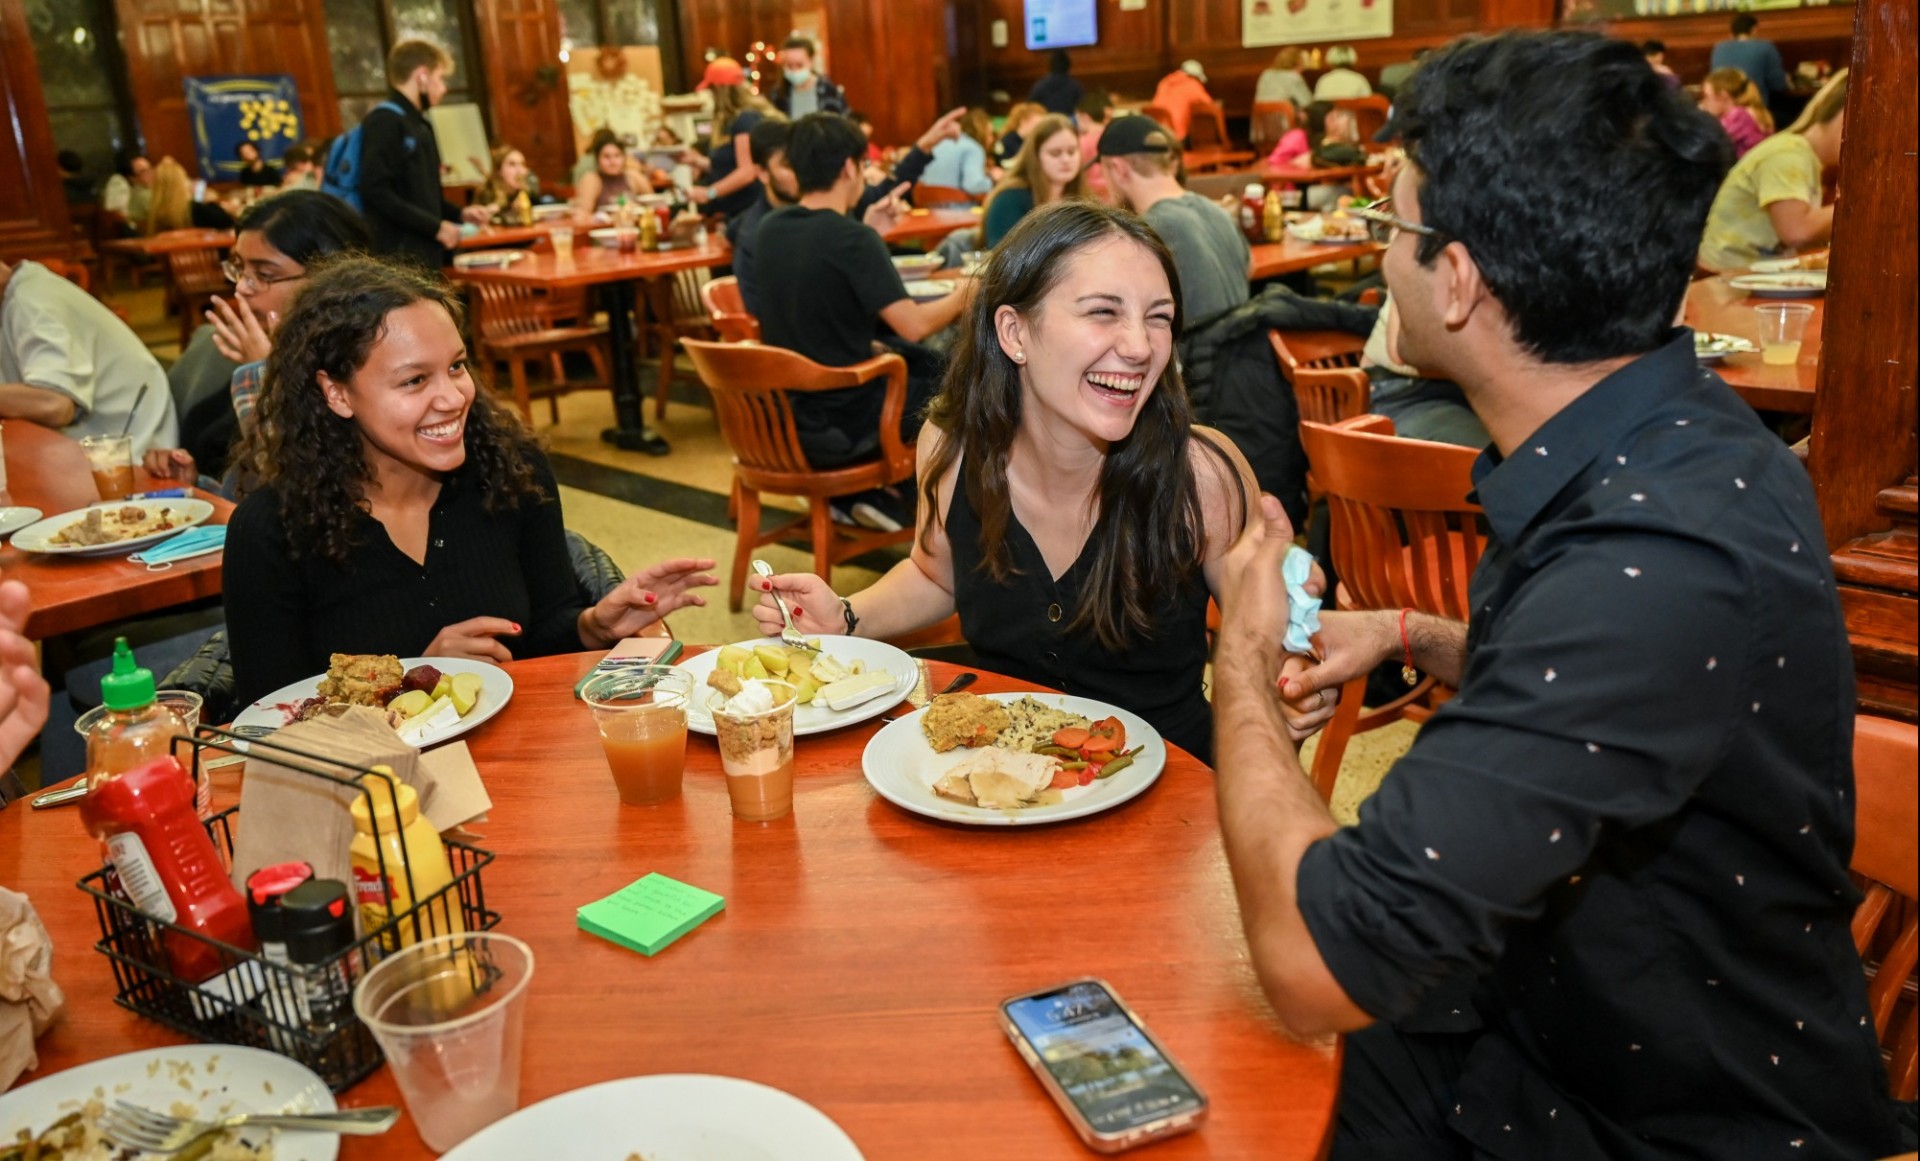 Three students laughing while eating in the dining hall